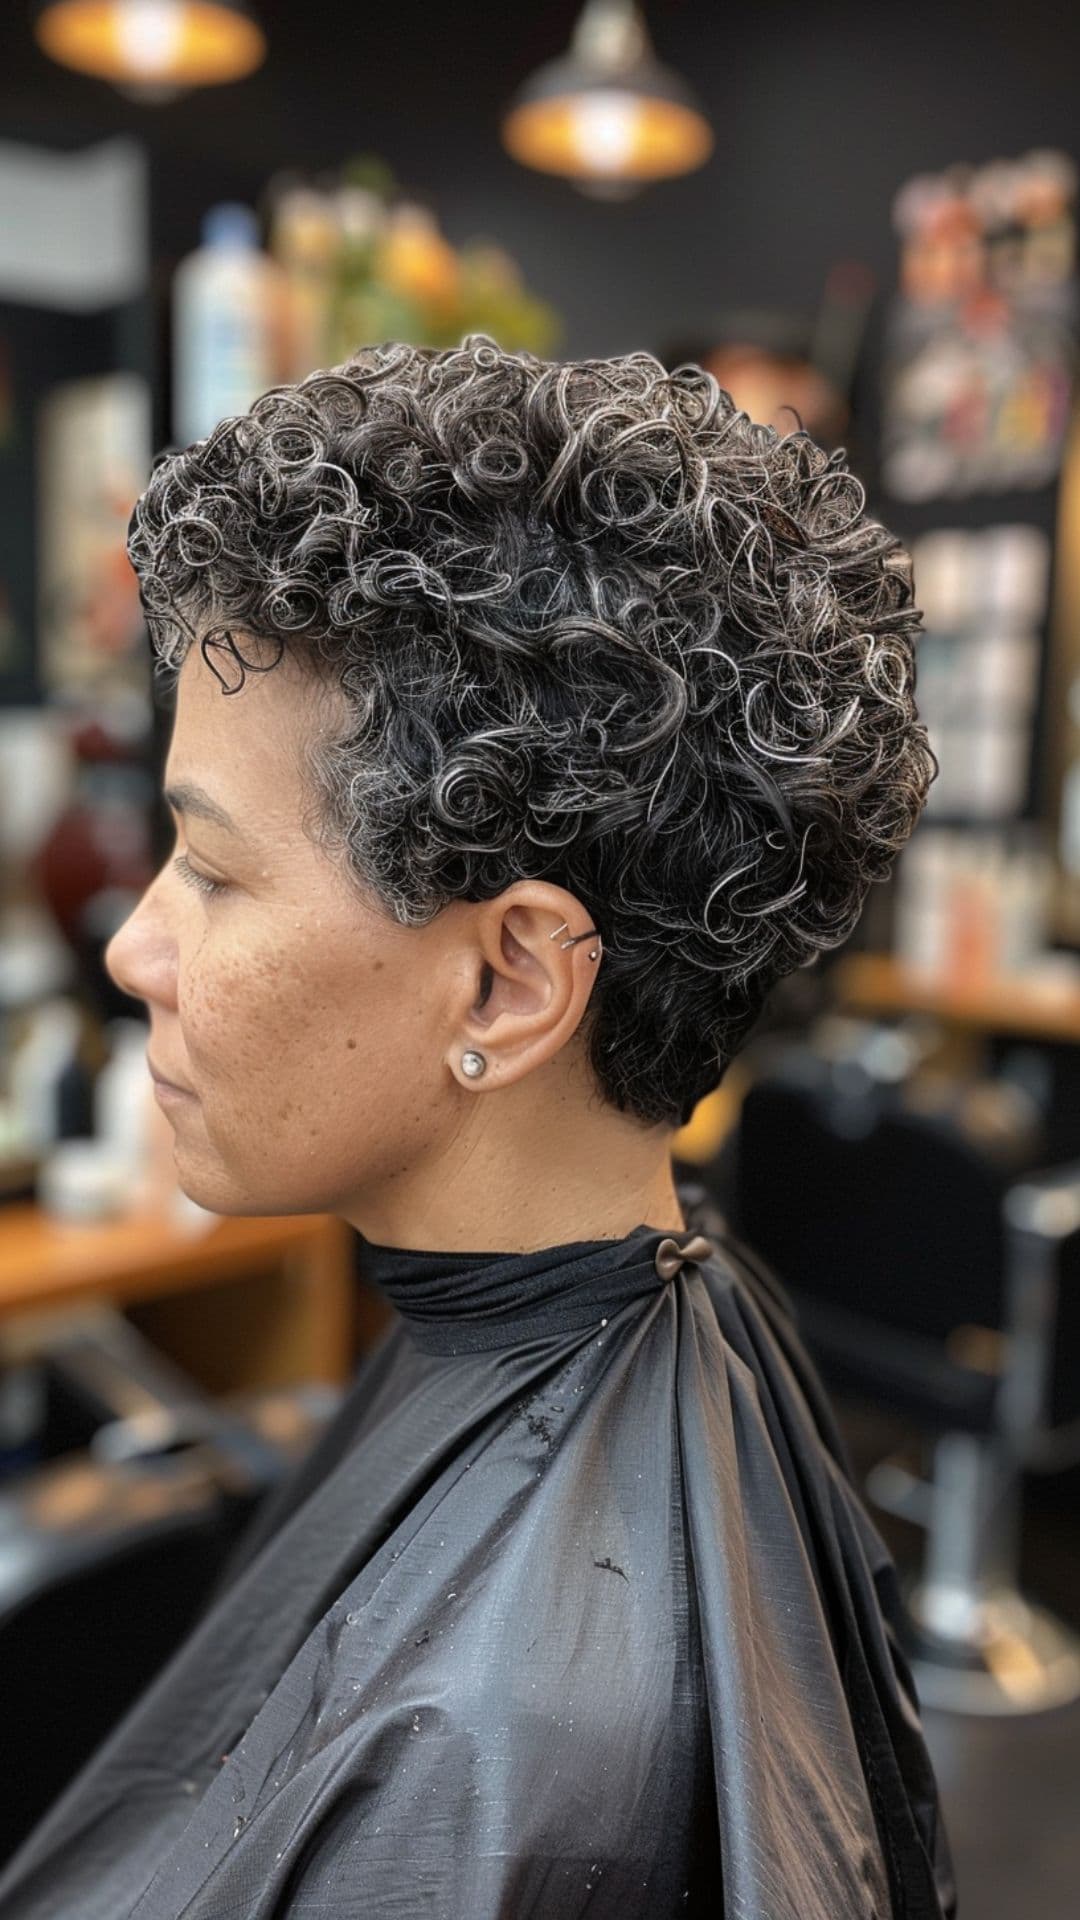 An older woman modelling a curly pixie cut.